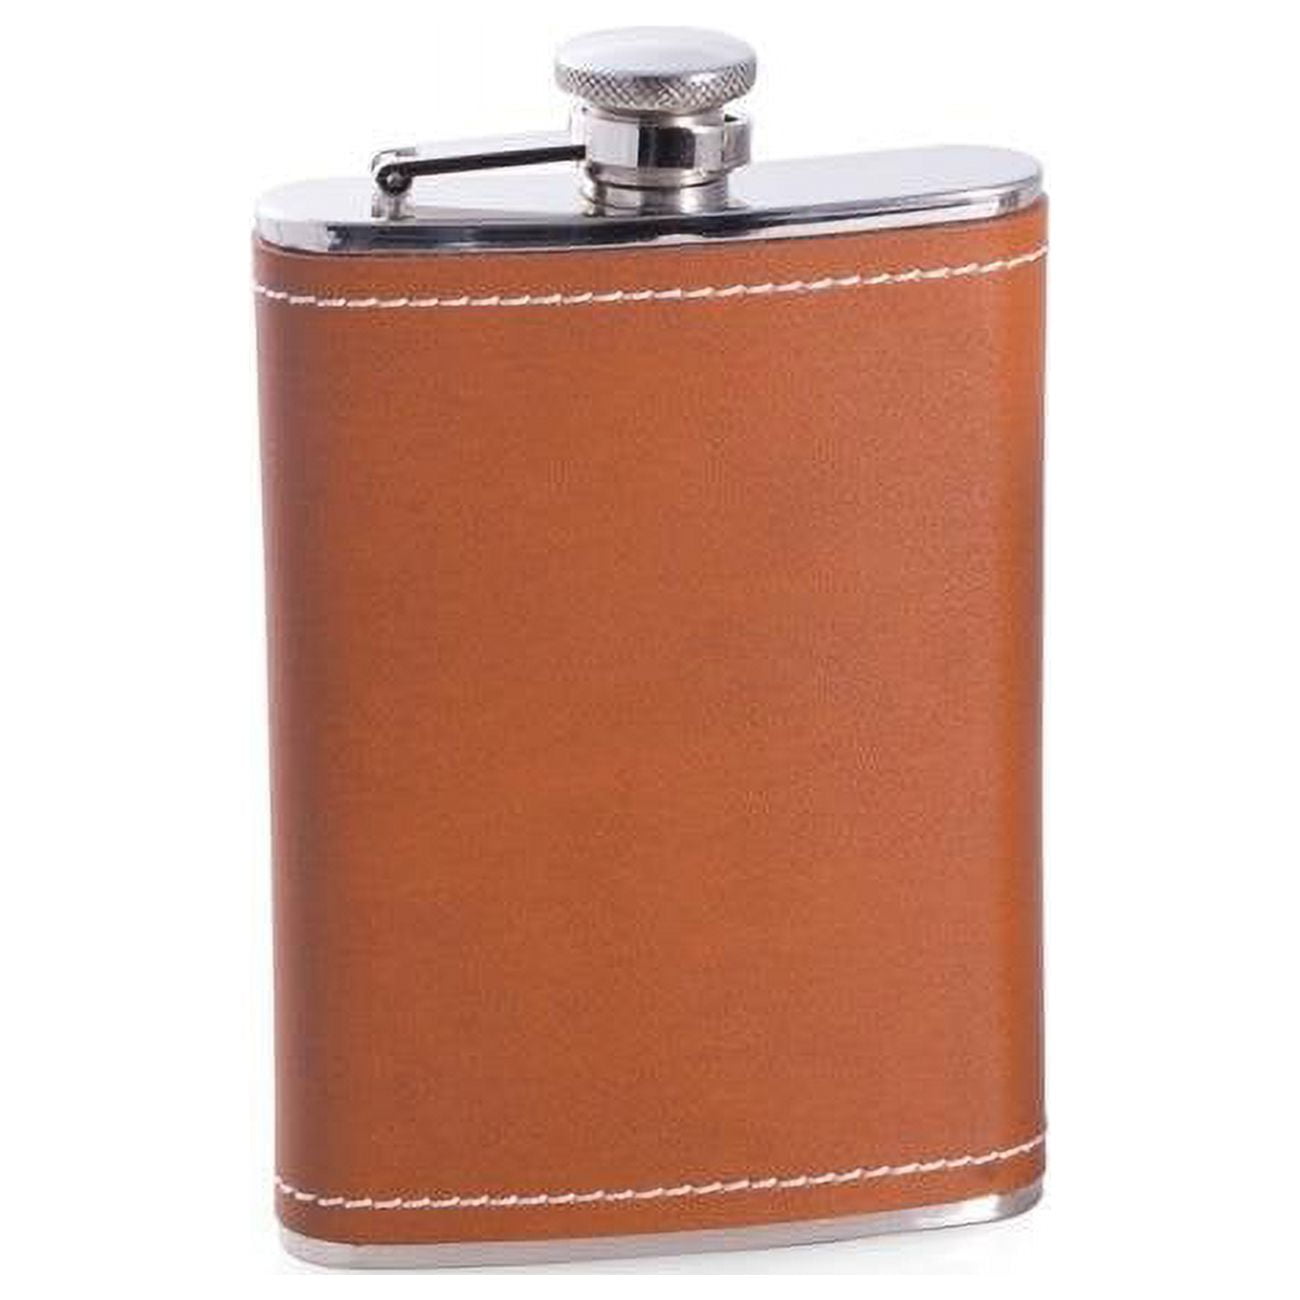 Picture of Bey-Berk International FS148 8 oz Stainless Steel Saddle Brown Leather White Stitch Flask with Captive Cap &amp; Durable Rubber Seal